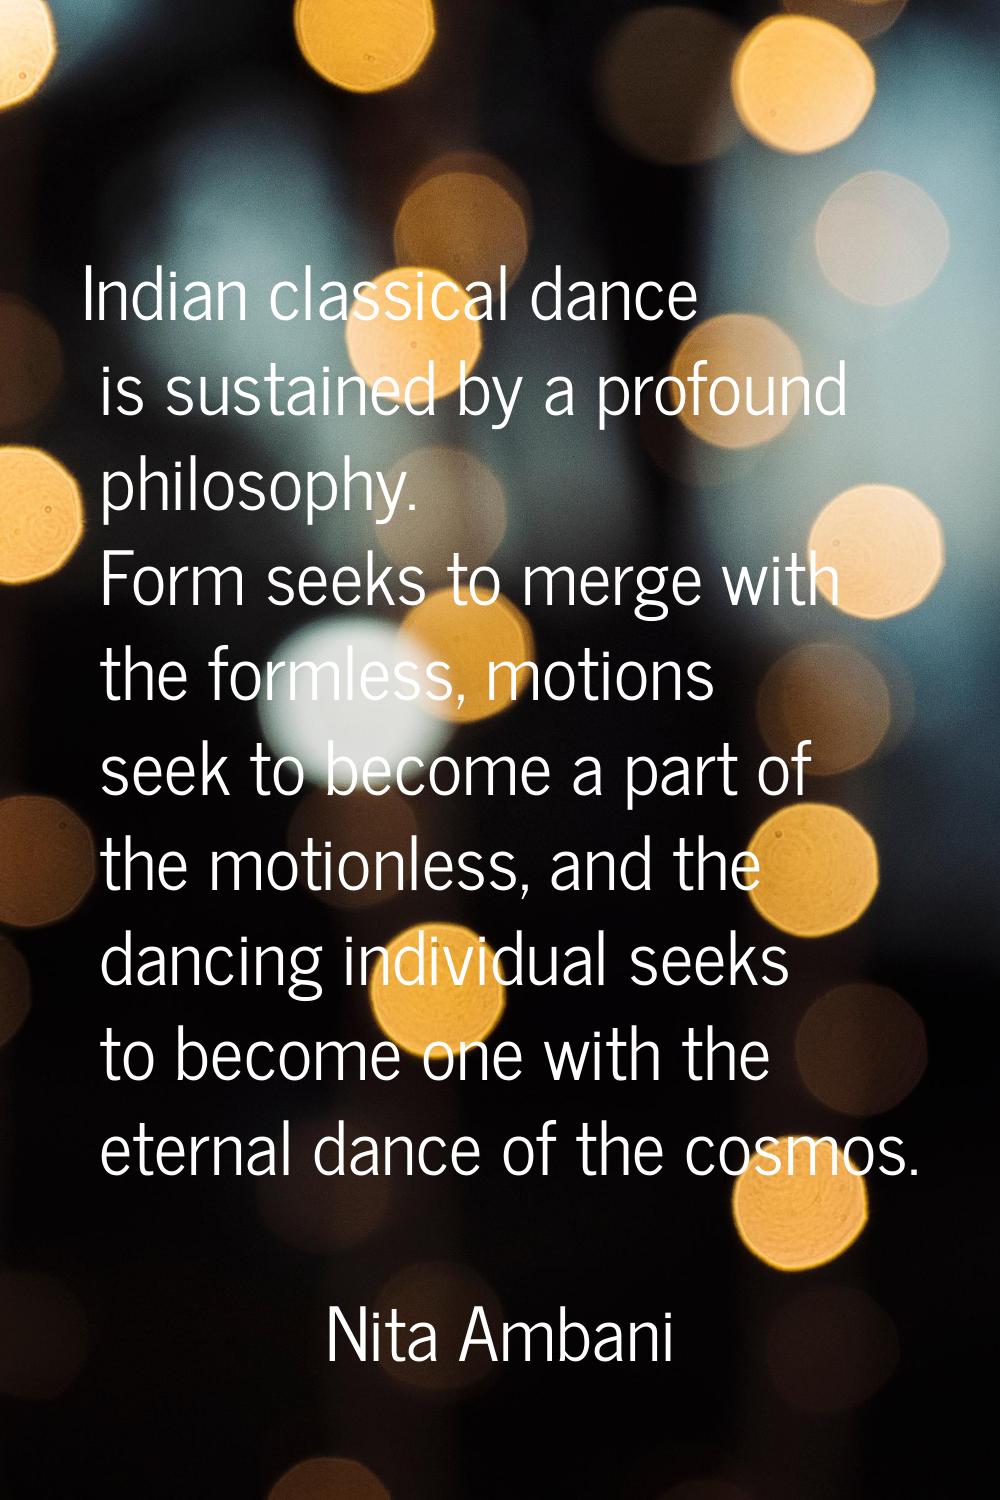 Indian classical dance is sustained by a profound philosophy. Form seeks to merge with the formless